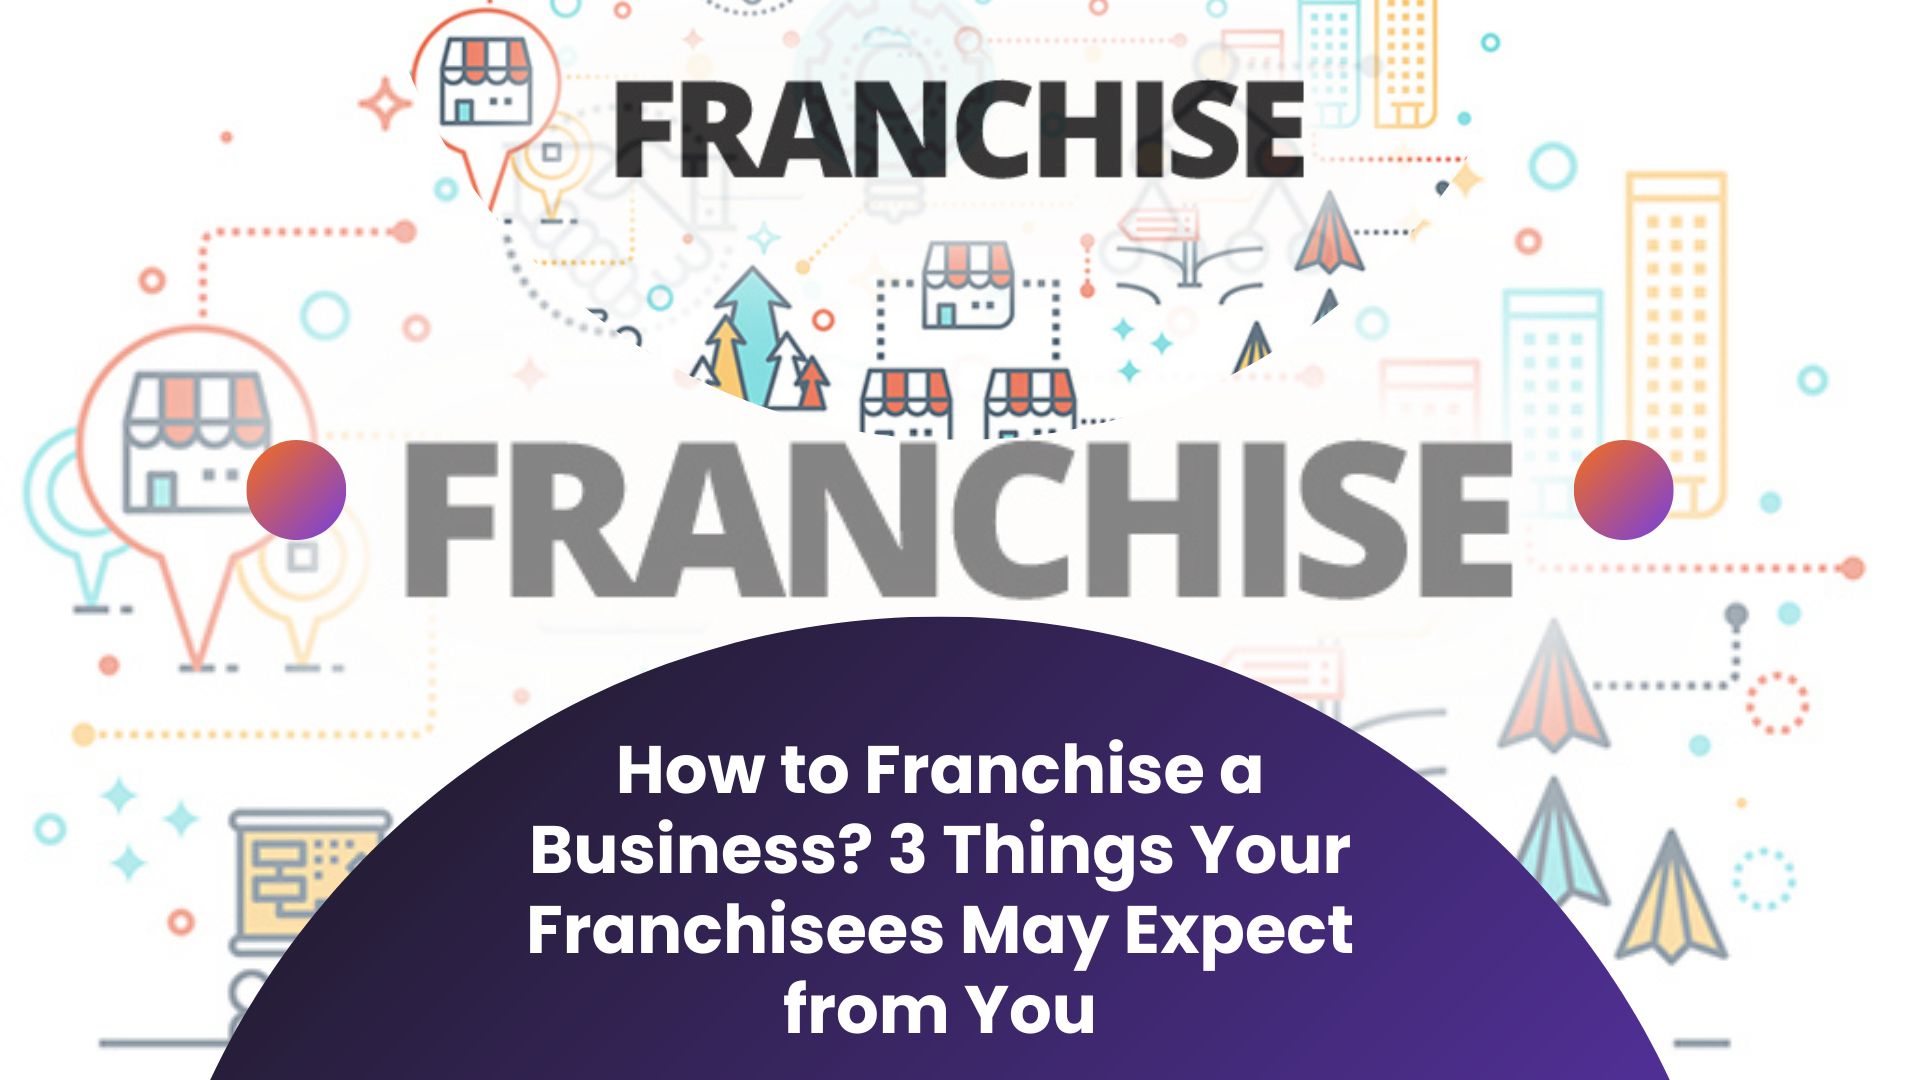 3 Things Your Franchisees May Expect from You